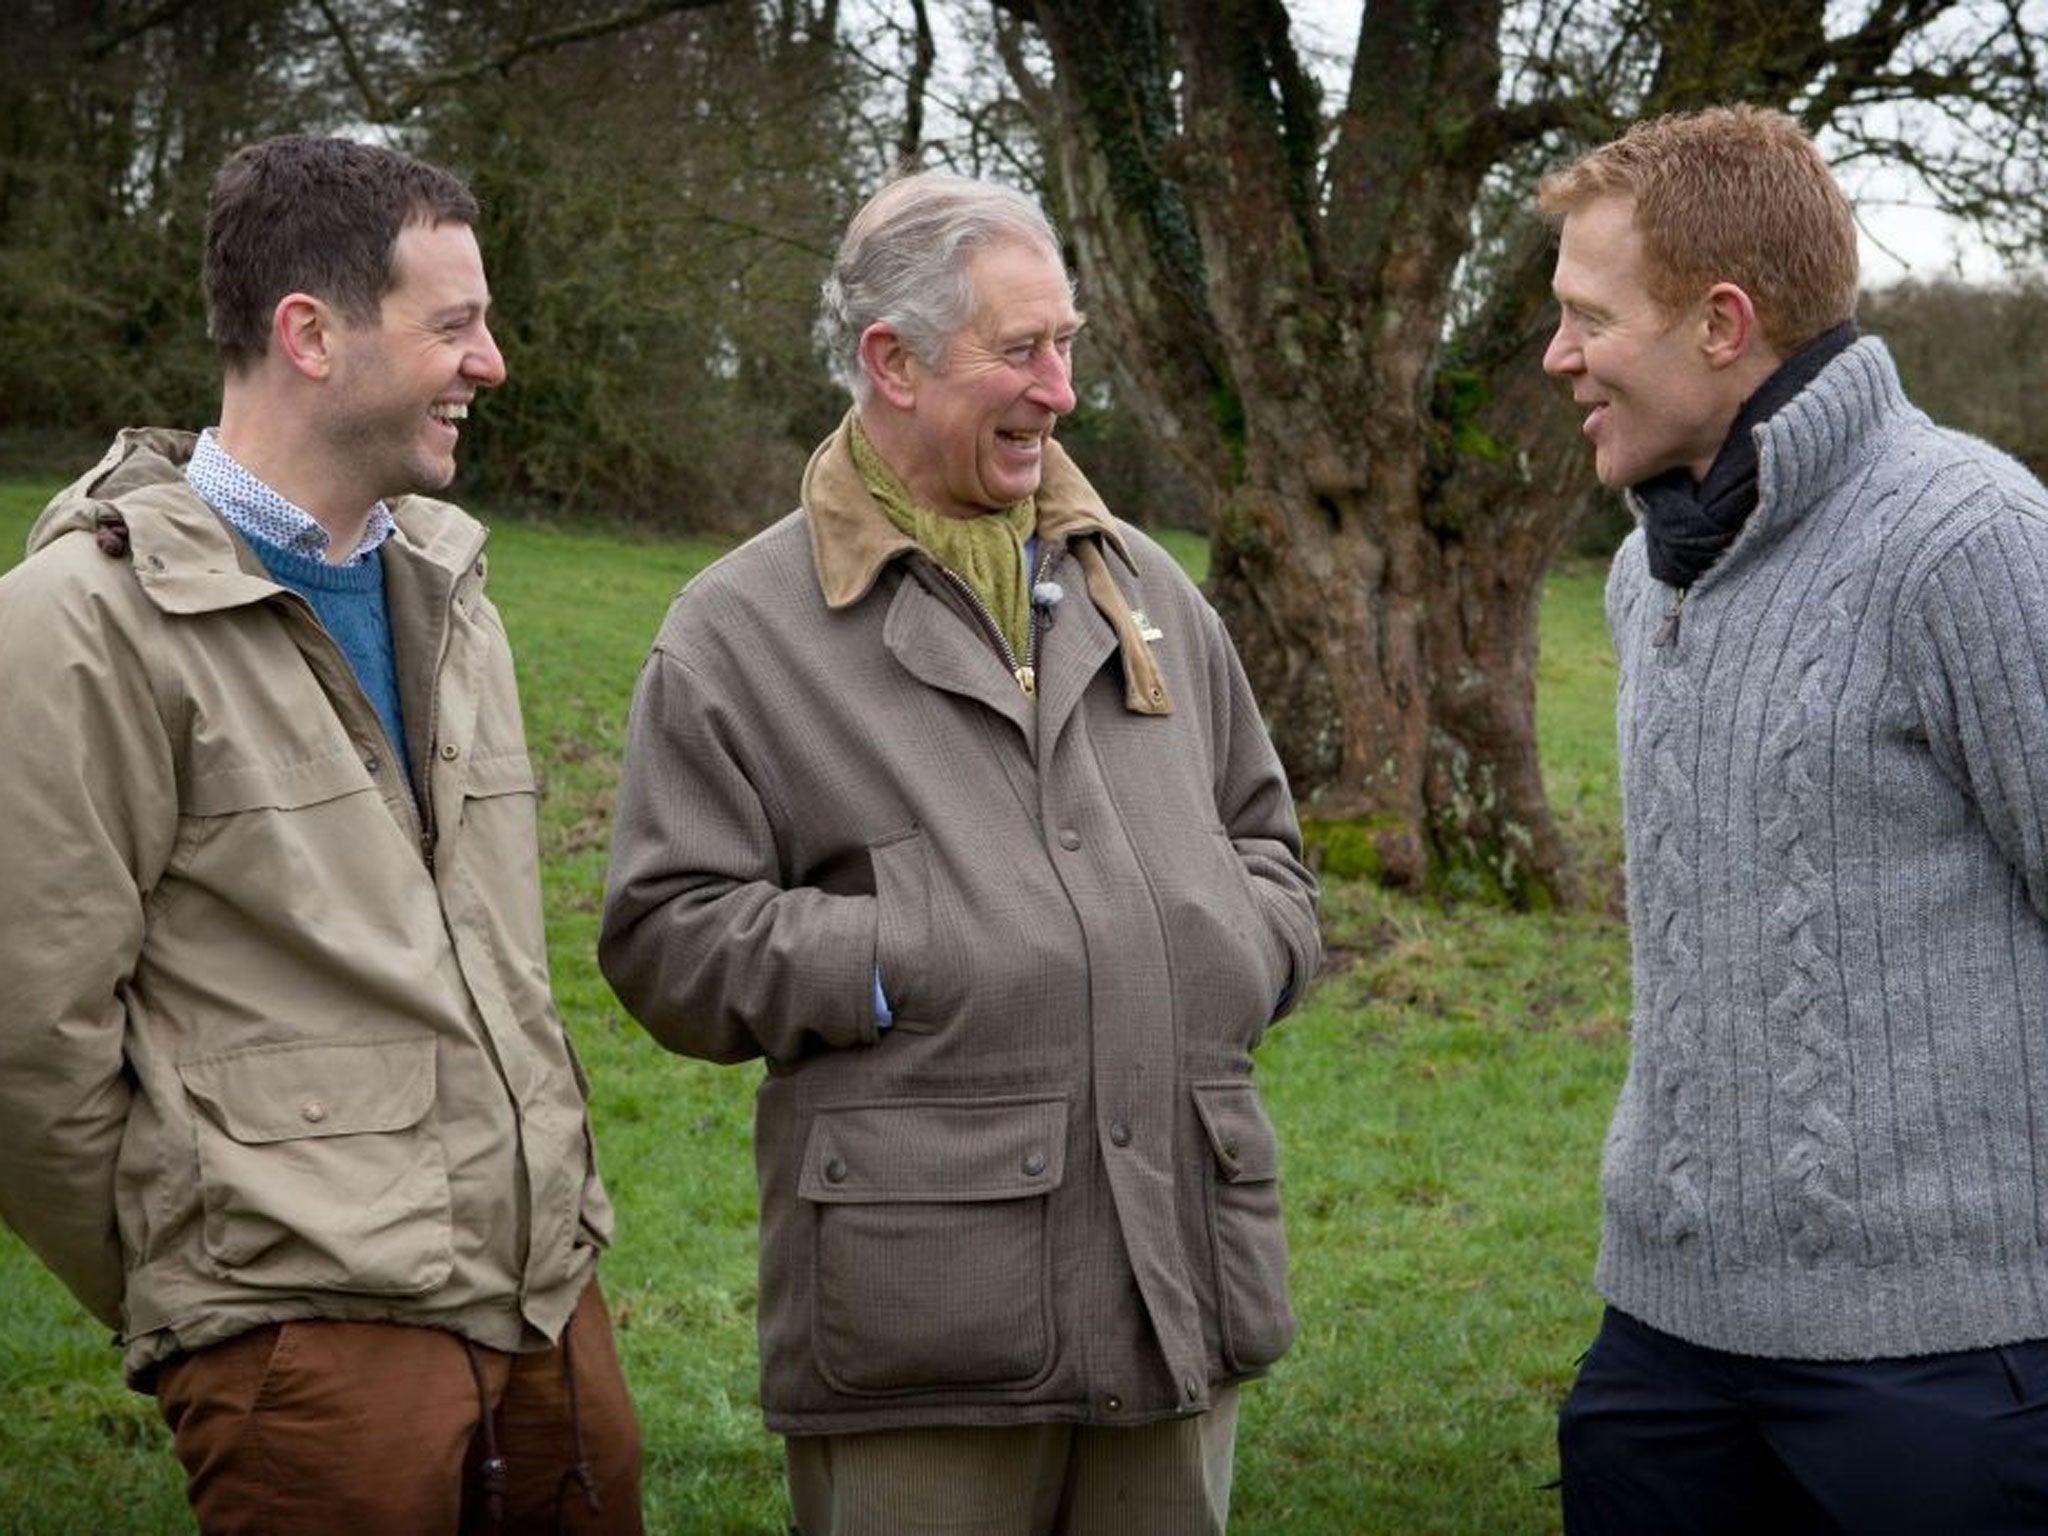 The Prince of Wales with Countryfile presenters Matt Baker (left) and Adam Henson